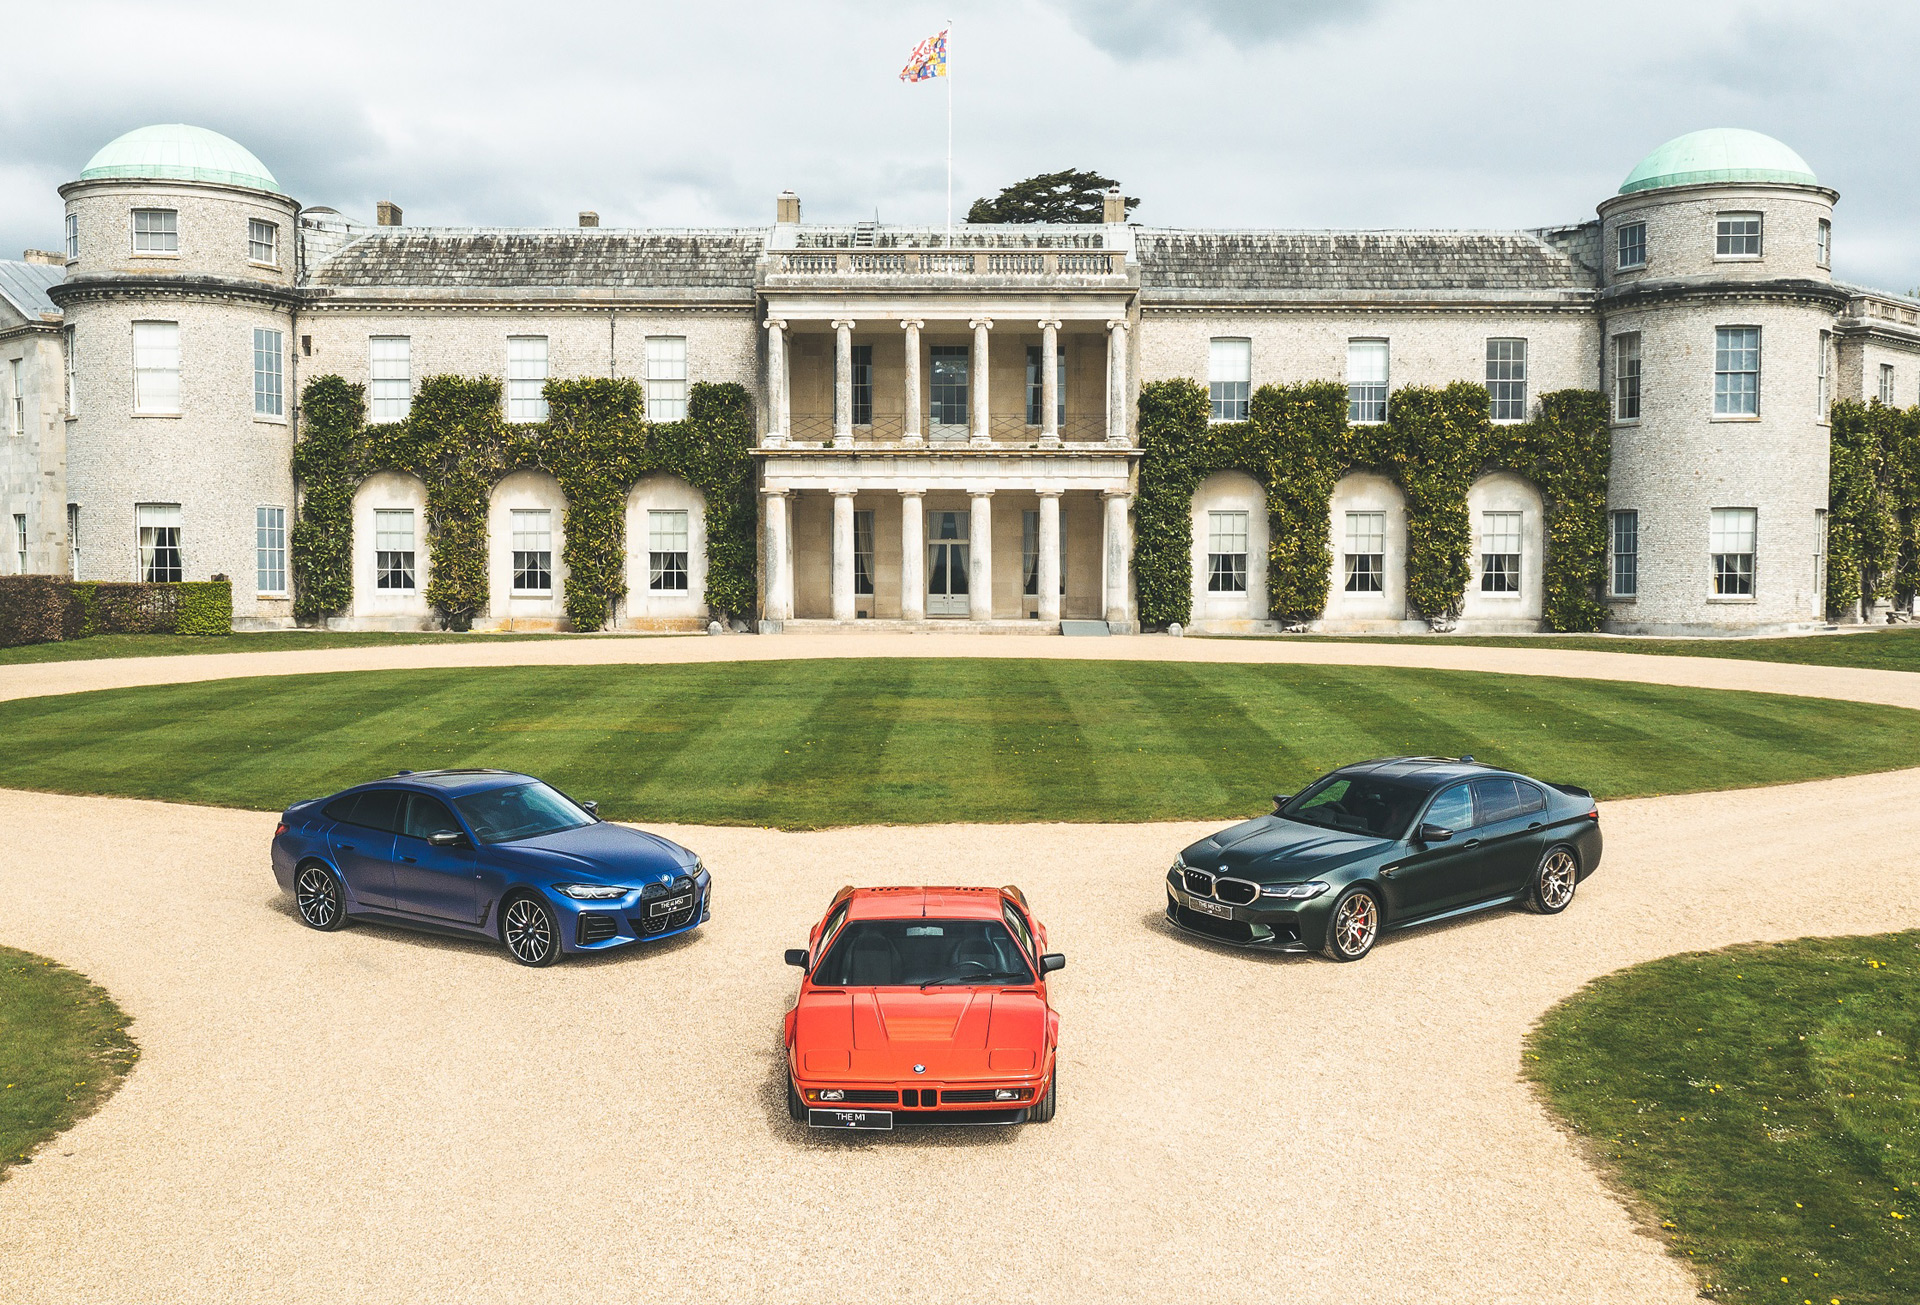 2022 Goodwood Festival of Speed Central Feature to celebrate BMW